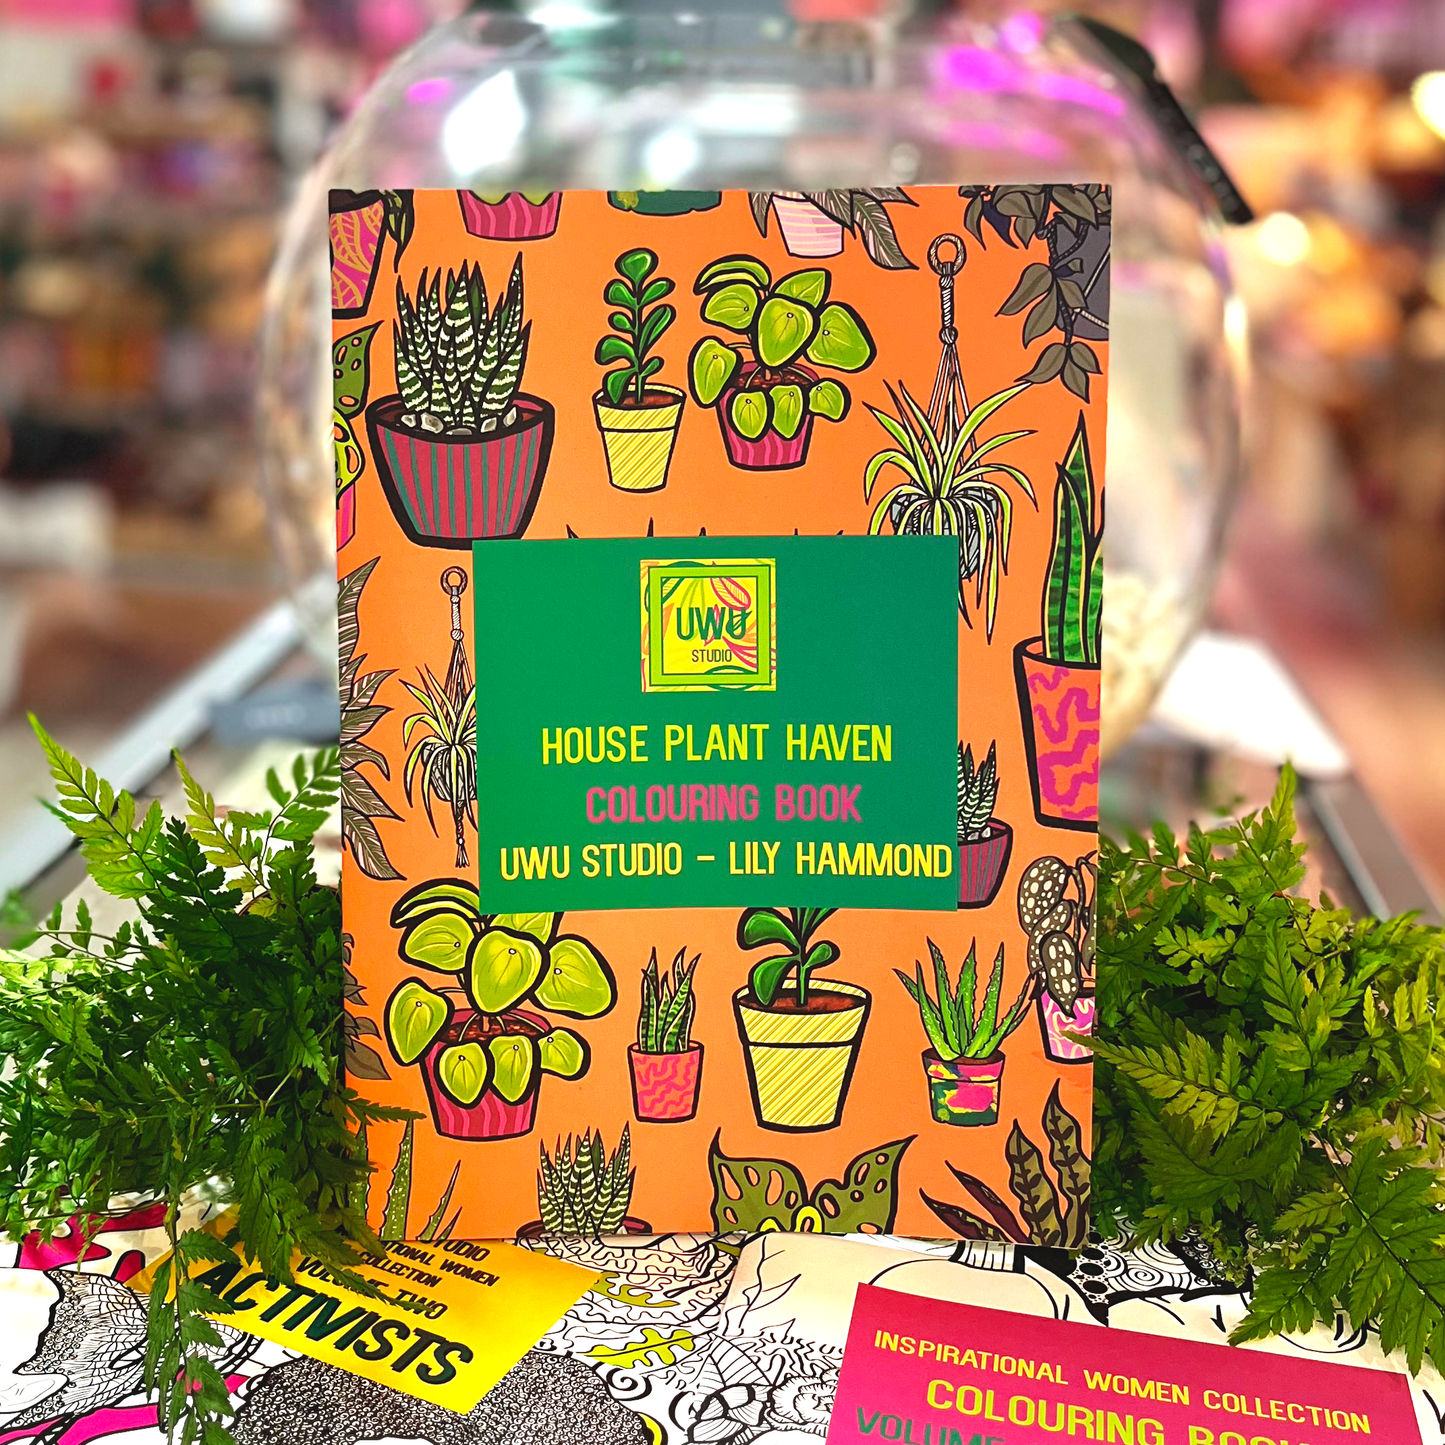 House Plant Haven Colouring Book